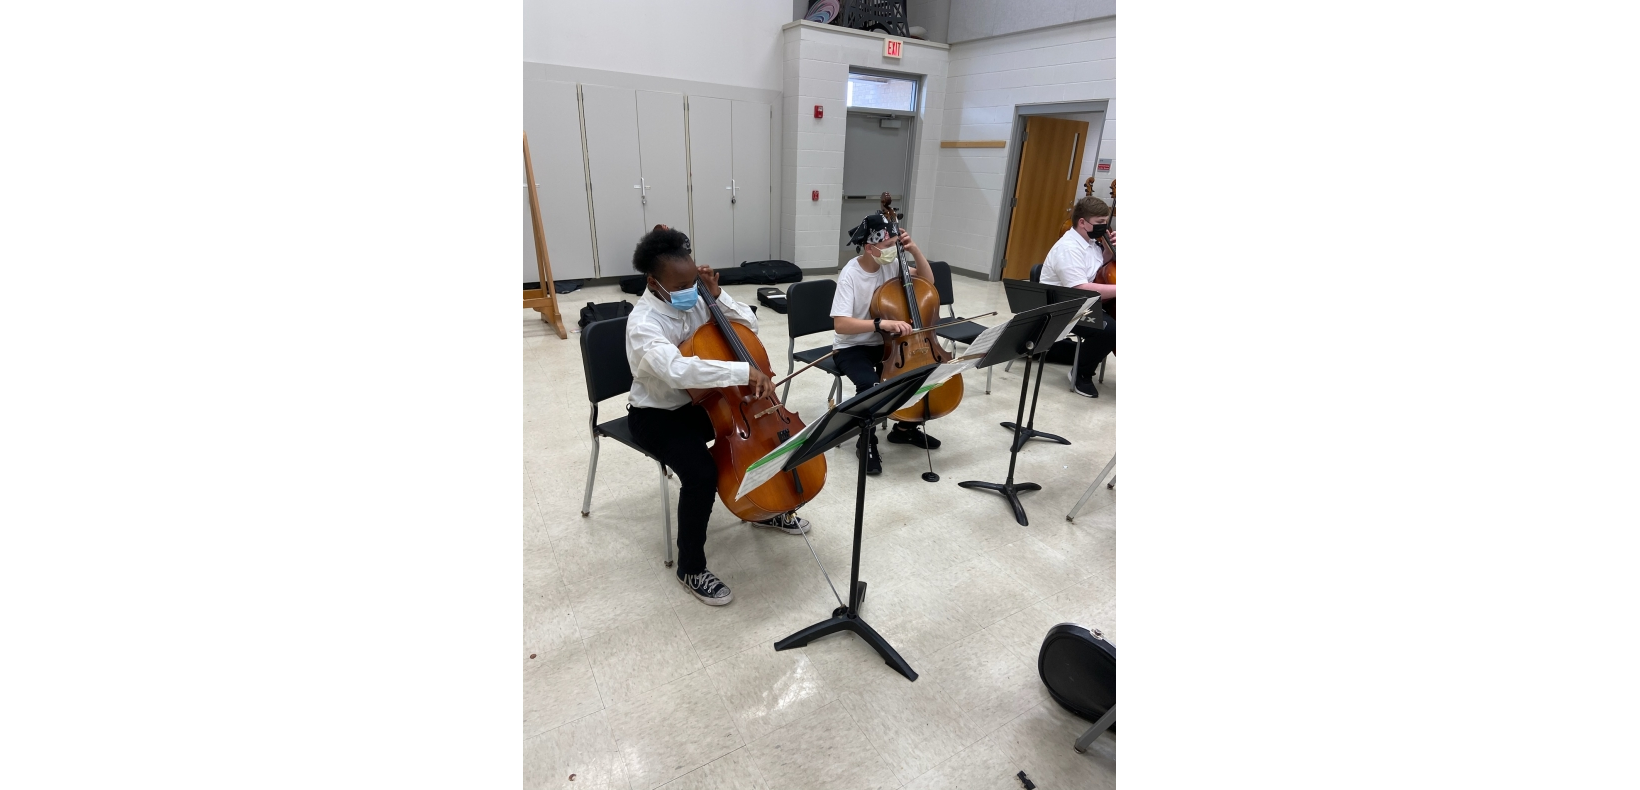 Two students playing string instruments